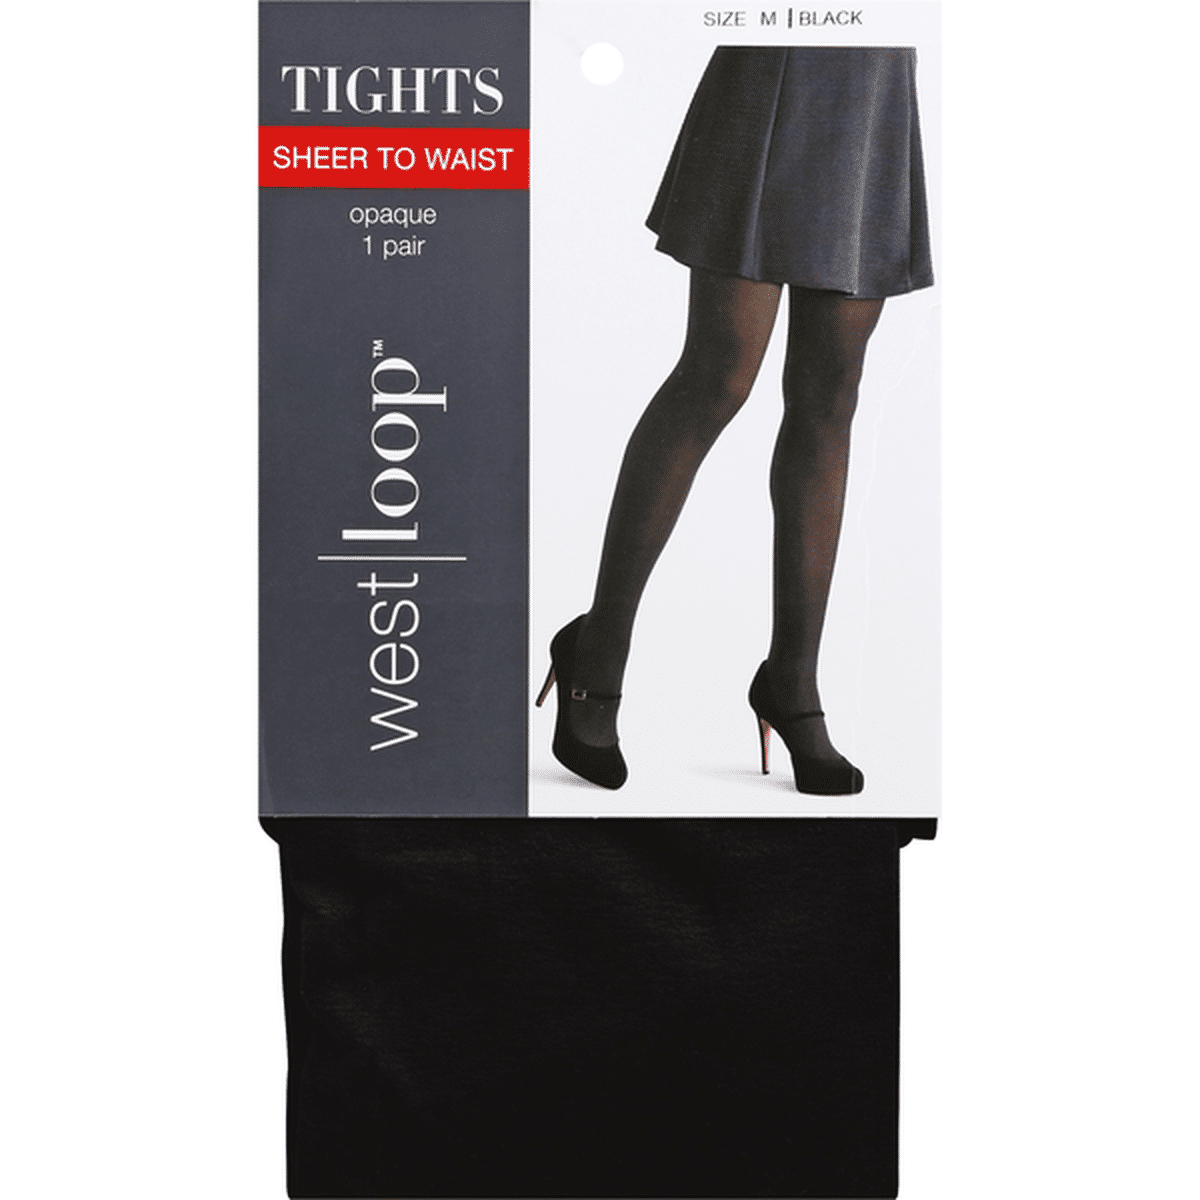 West Loop Tights, Opaque, Sheer to Waist, Size Medium, Black (1 pair)  Delivery or Pickup Near Me - Instacart